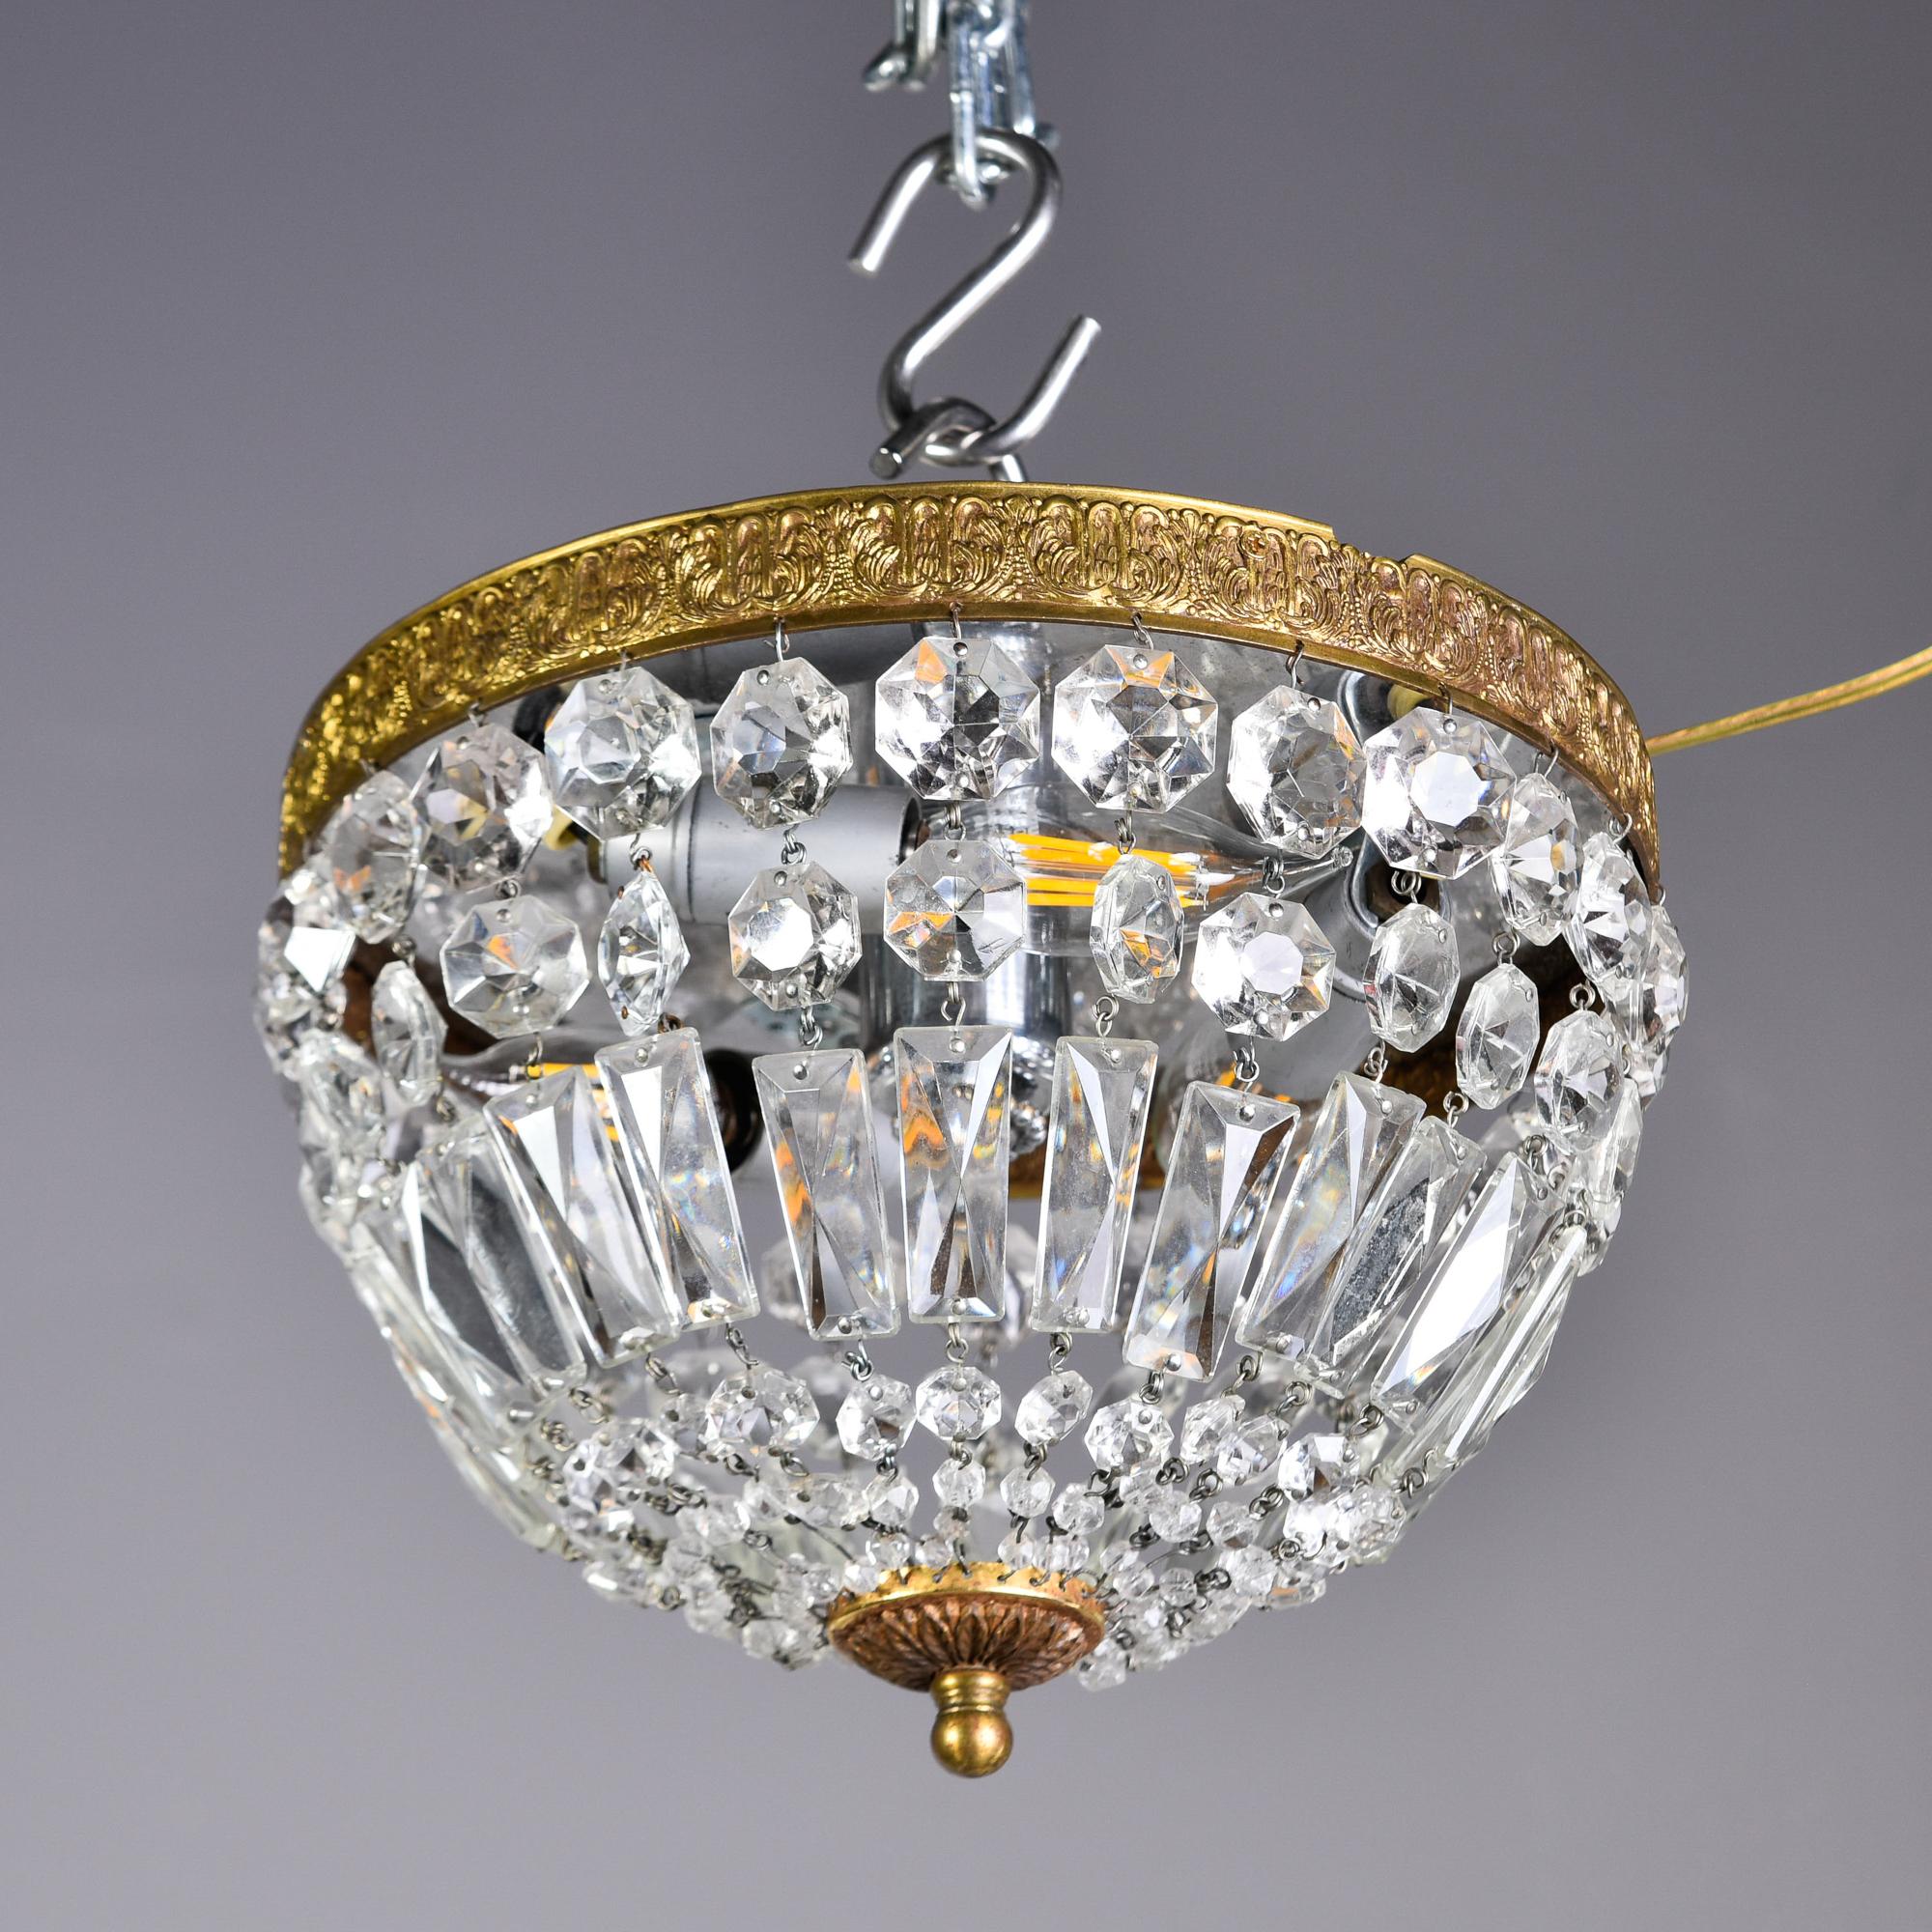 Vintage Italian Crystal and Brass Basket Form Ceiling Fixture For Sale 1